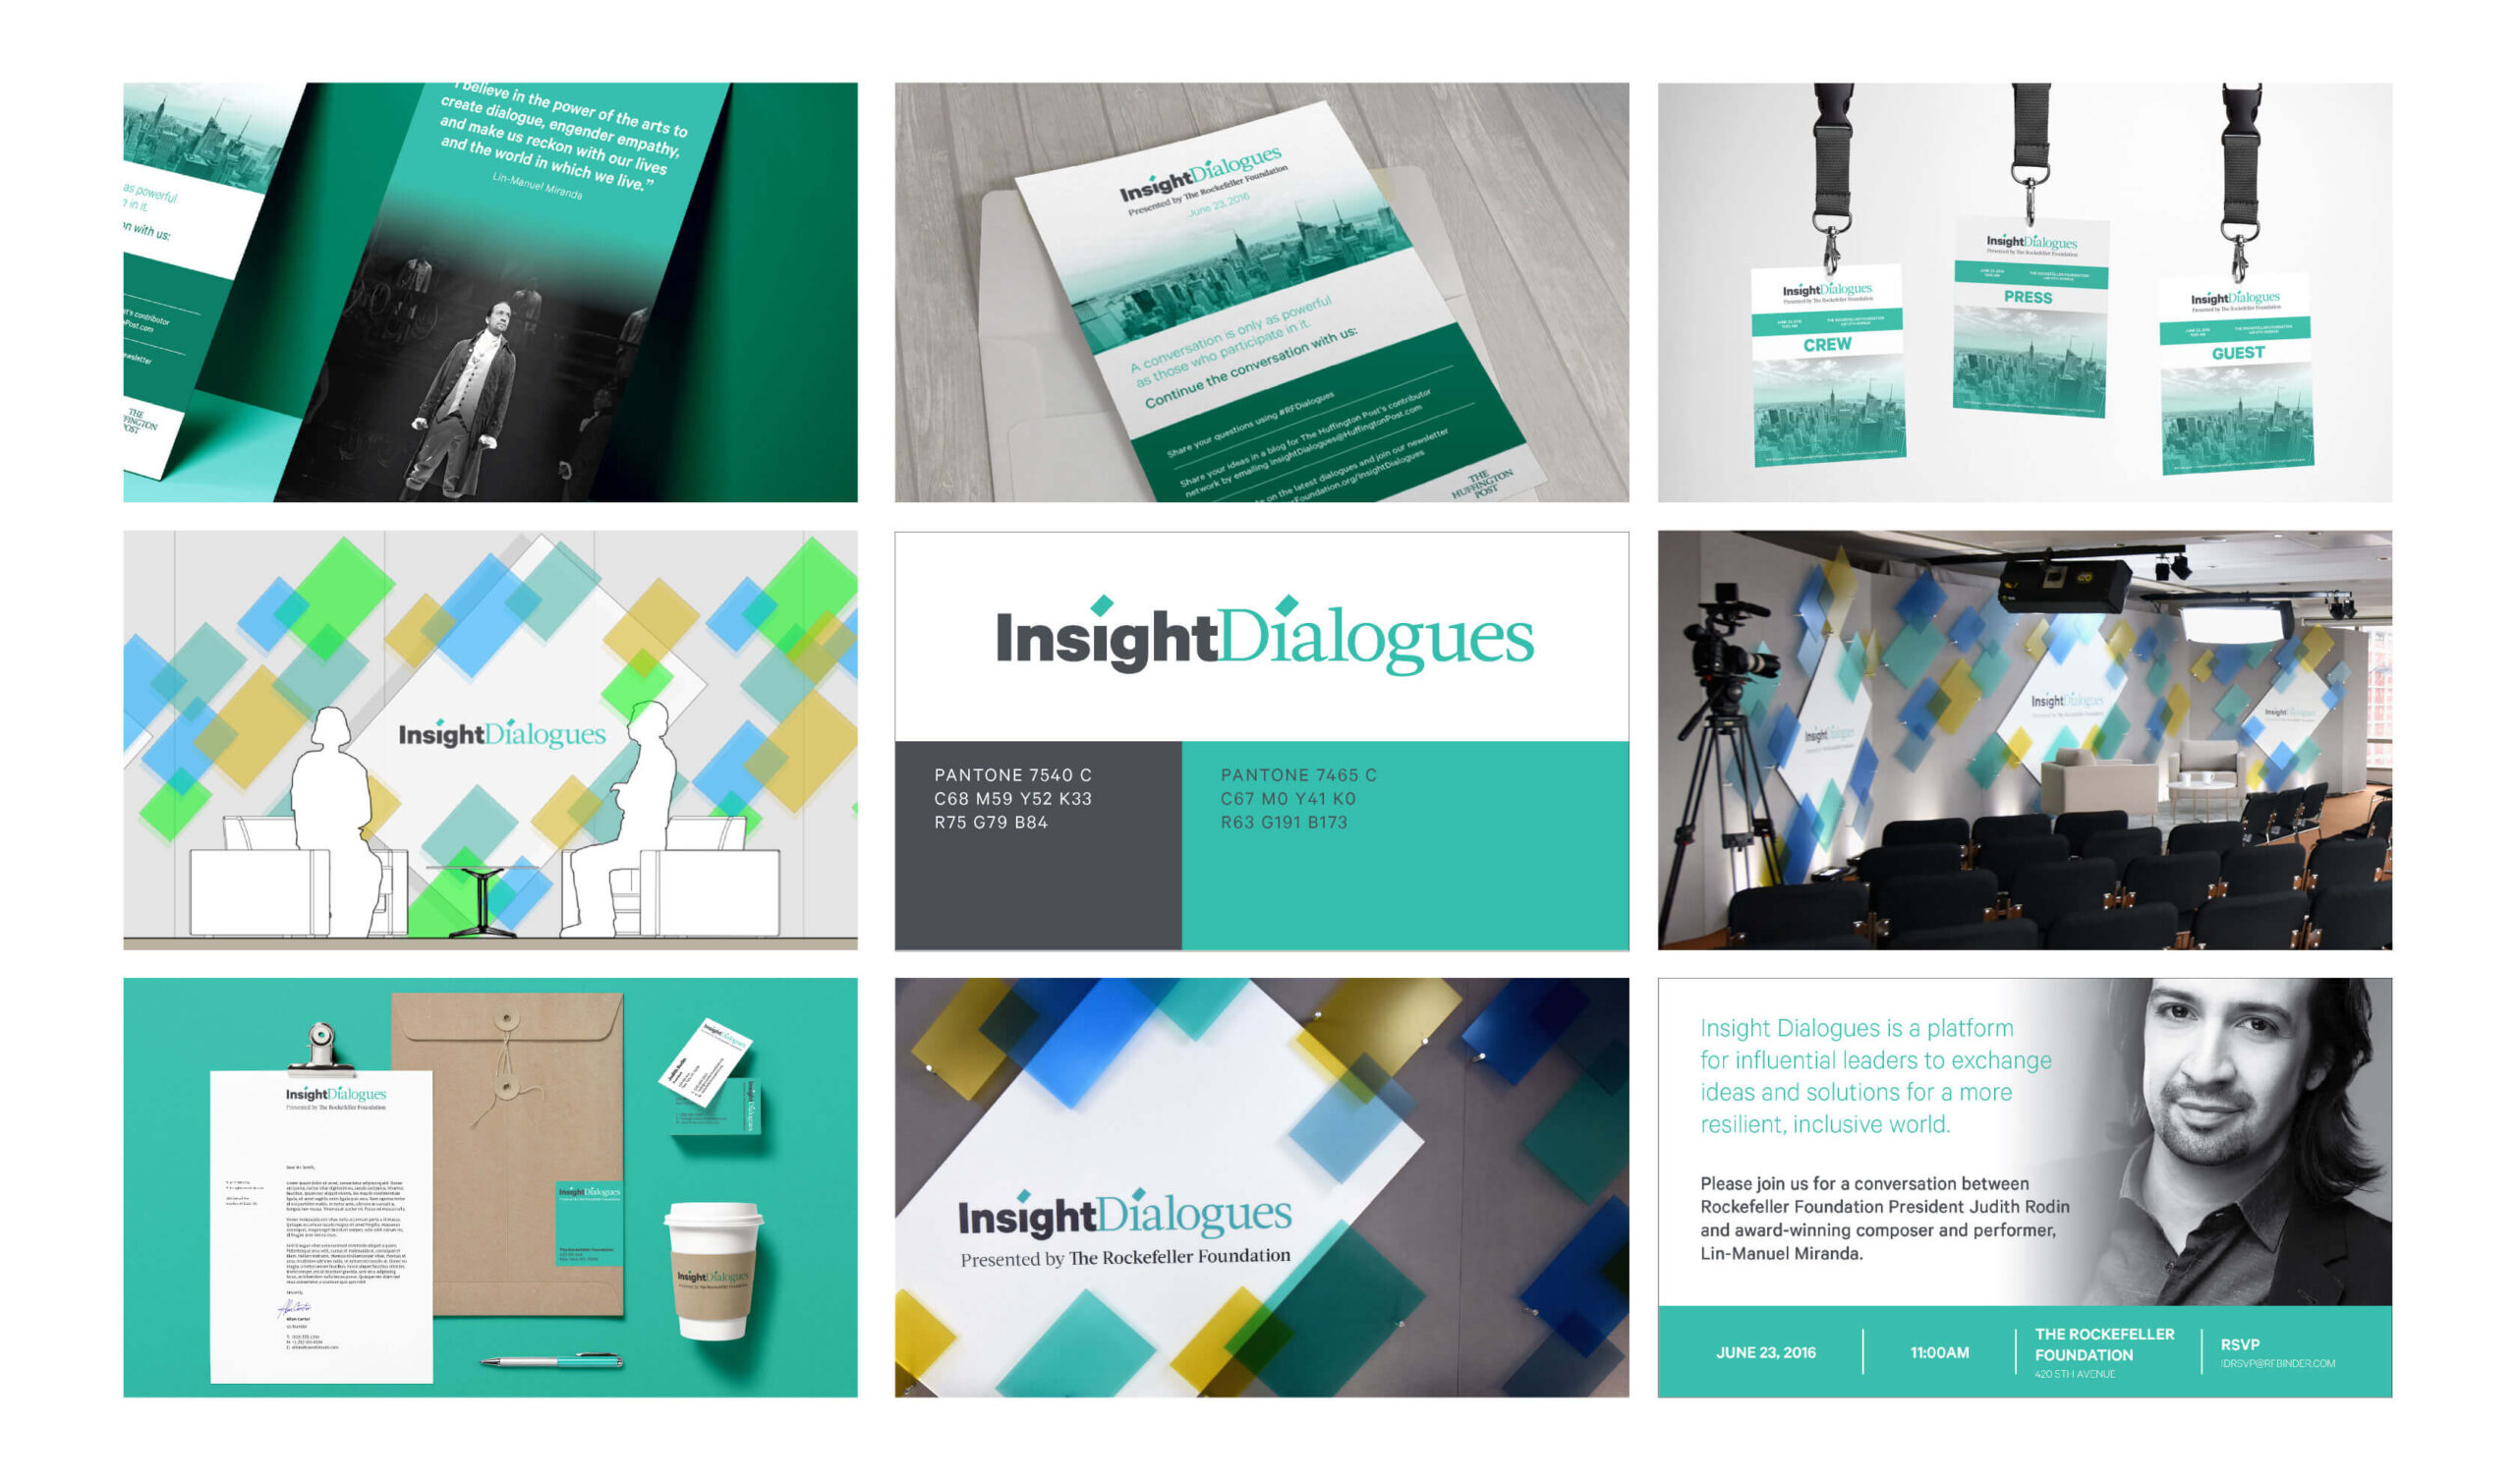 Branded materials for the Rockefeller's Foundation's Insight Dialogues event